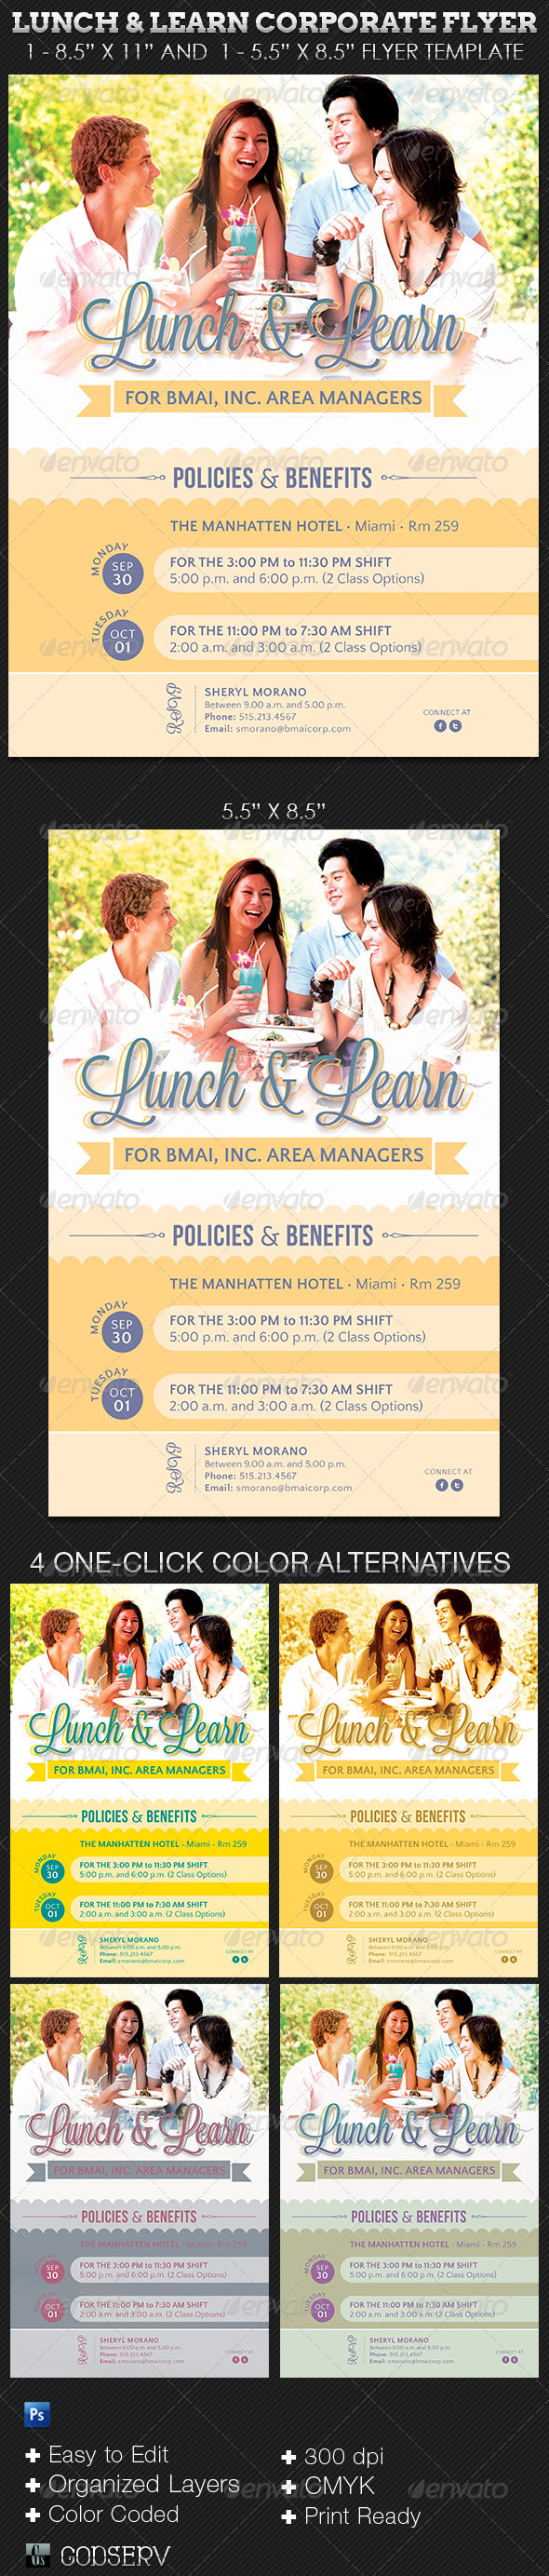 Lunch and Learn Corporate Flyer Template